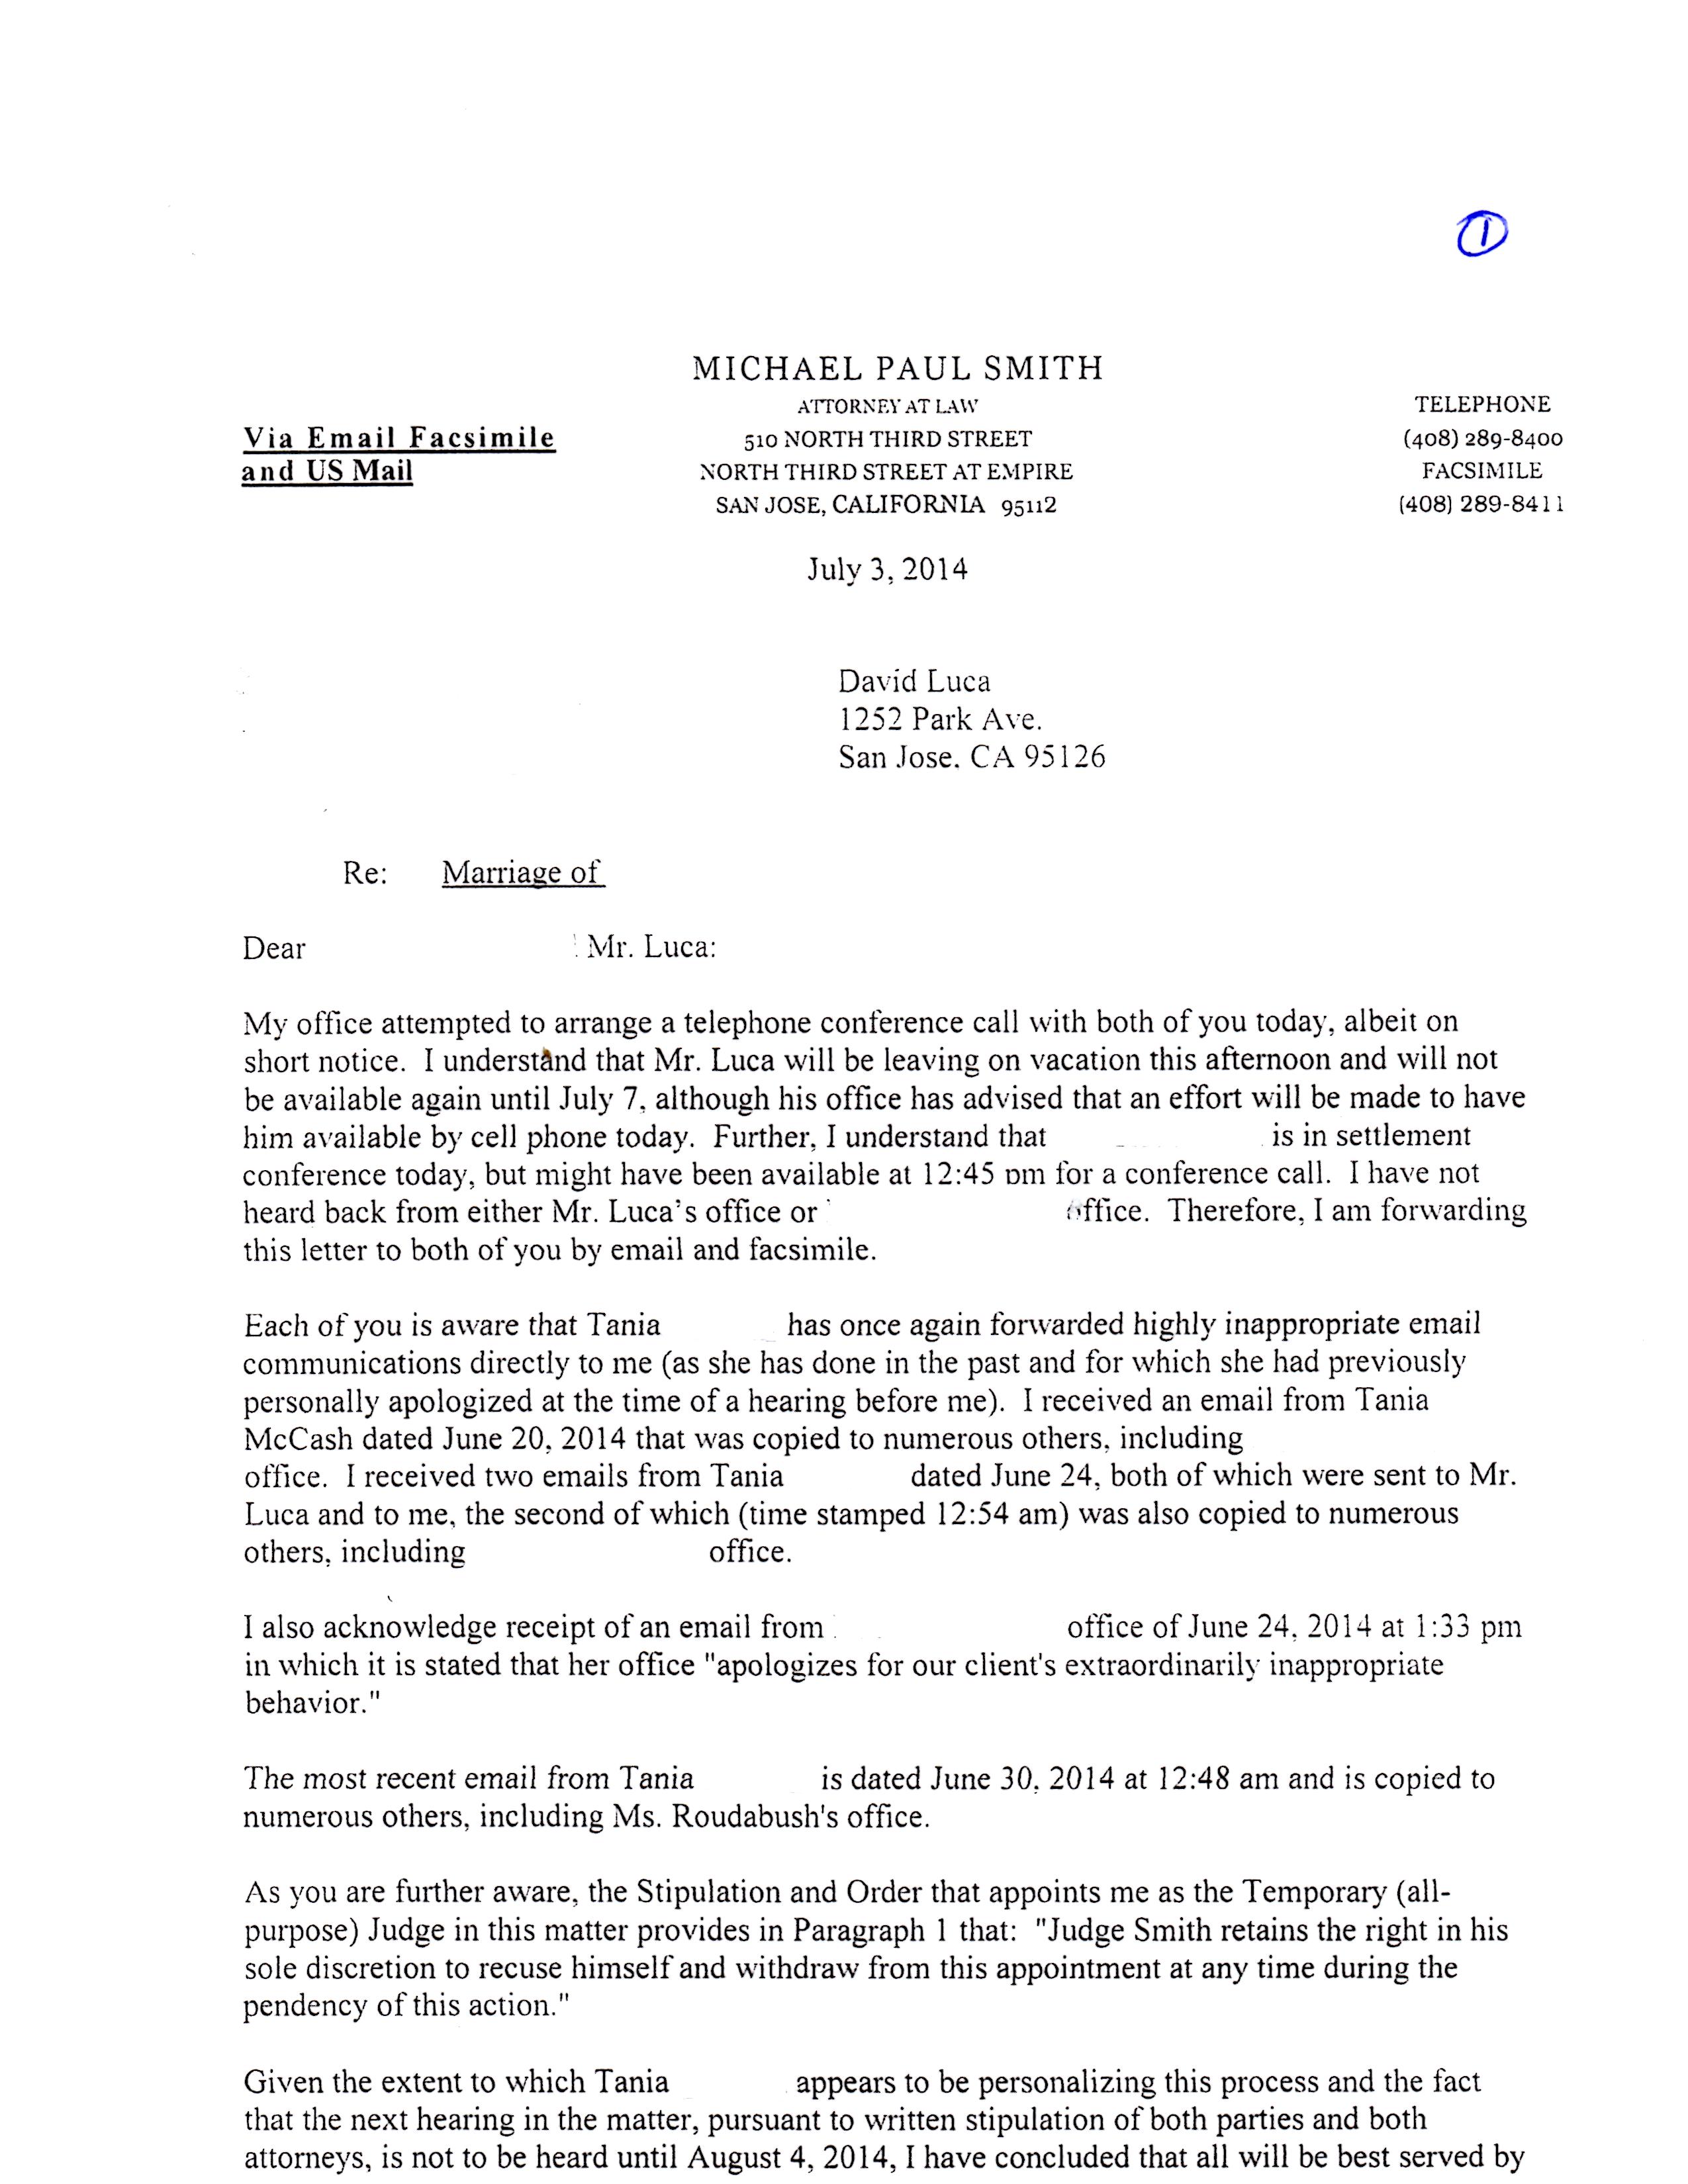 Letter from Judge Michael Smith